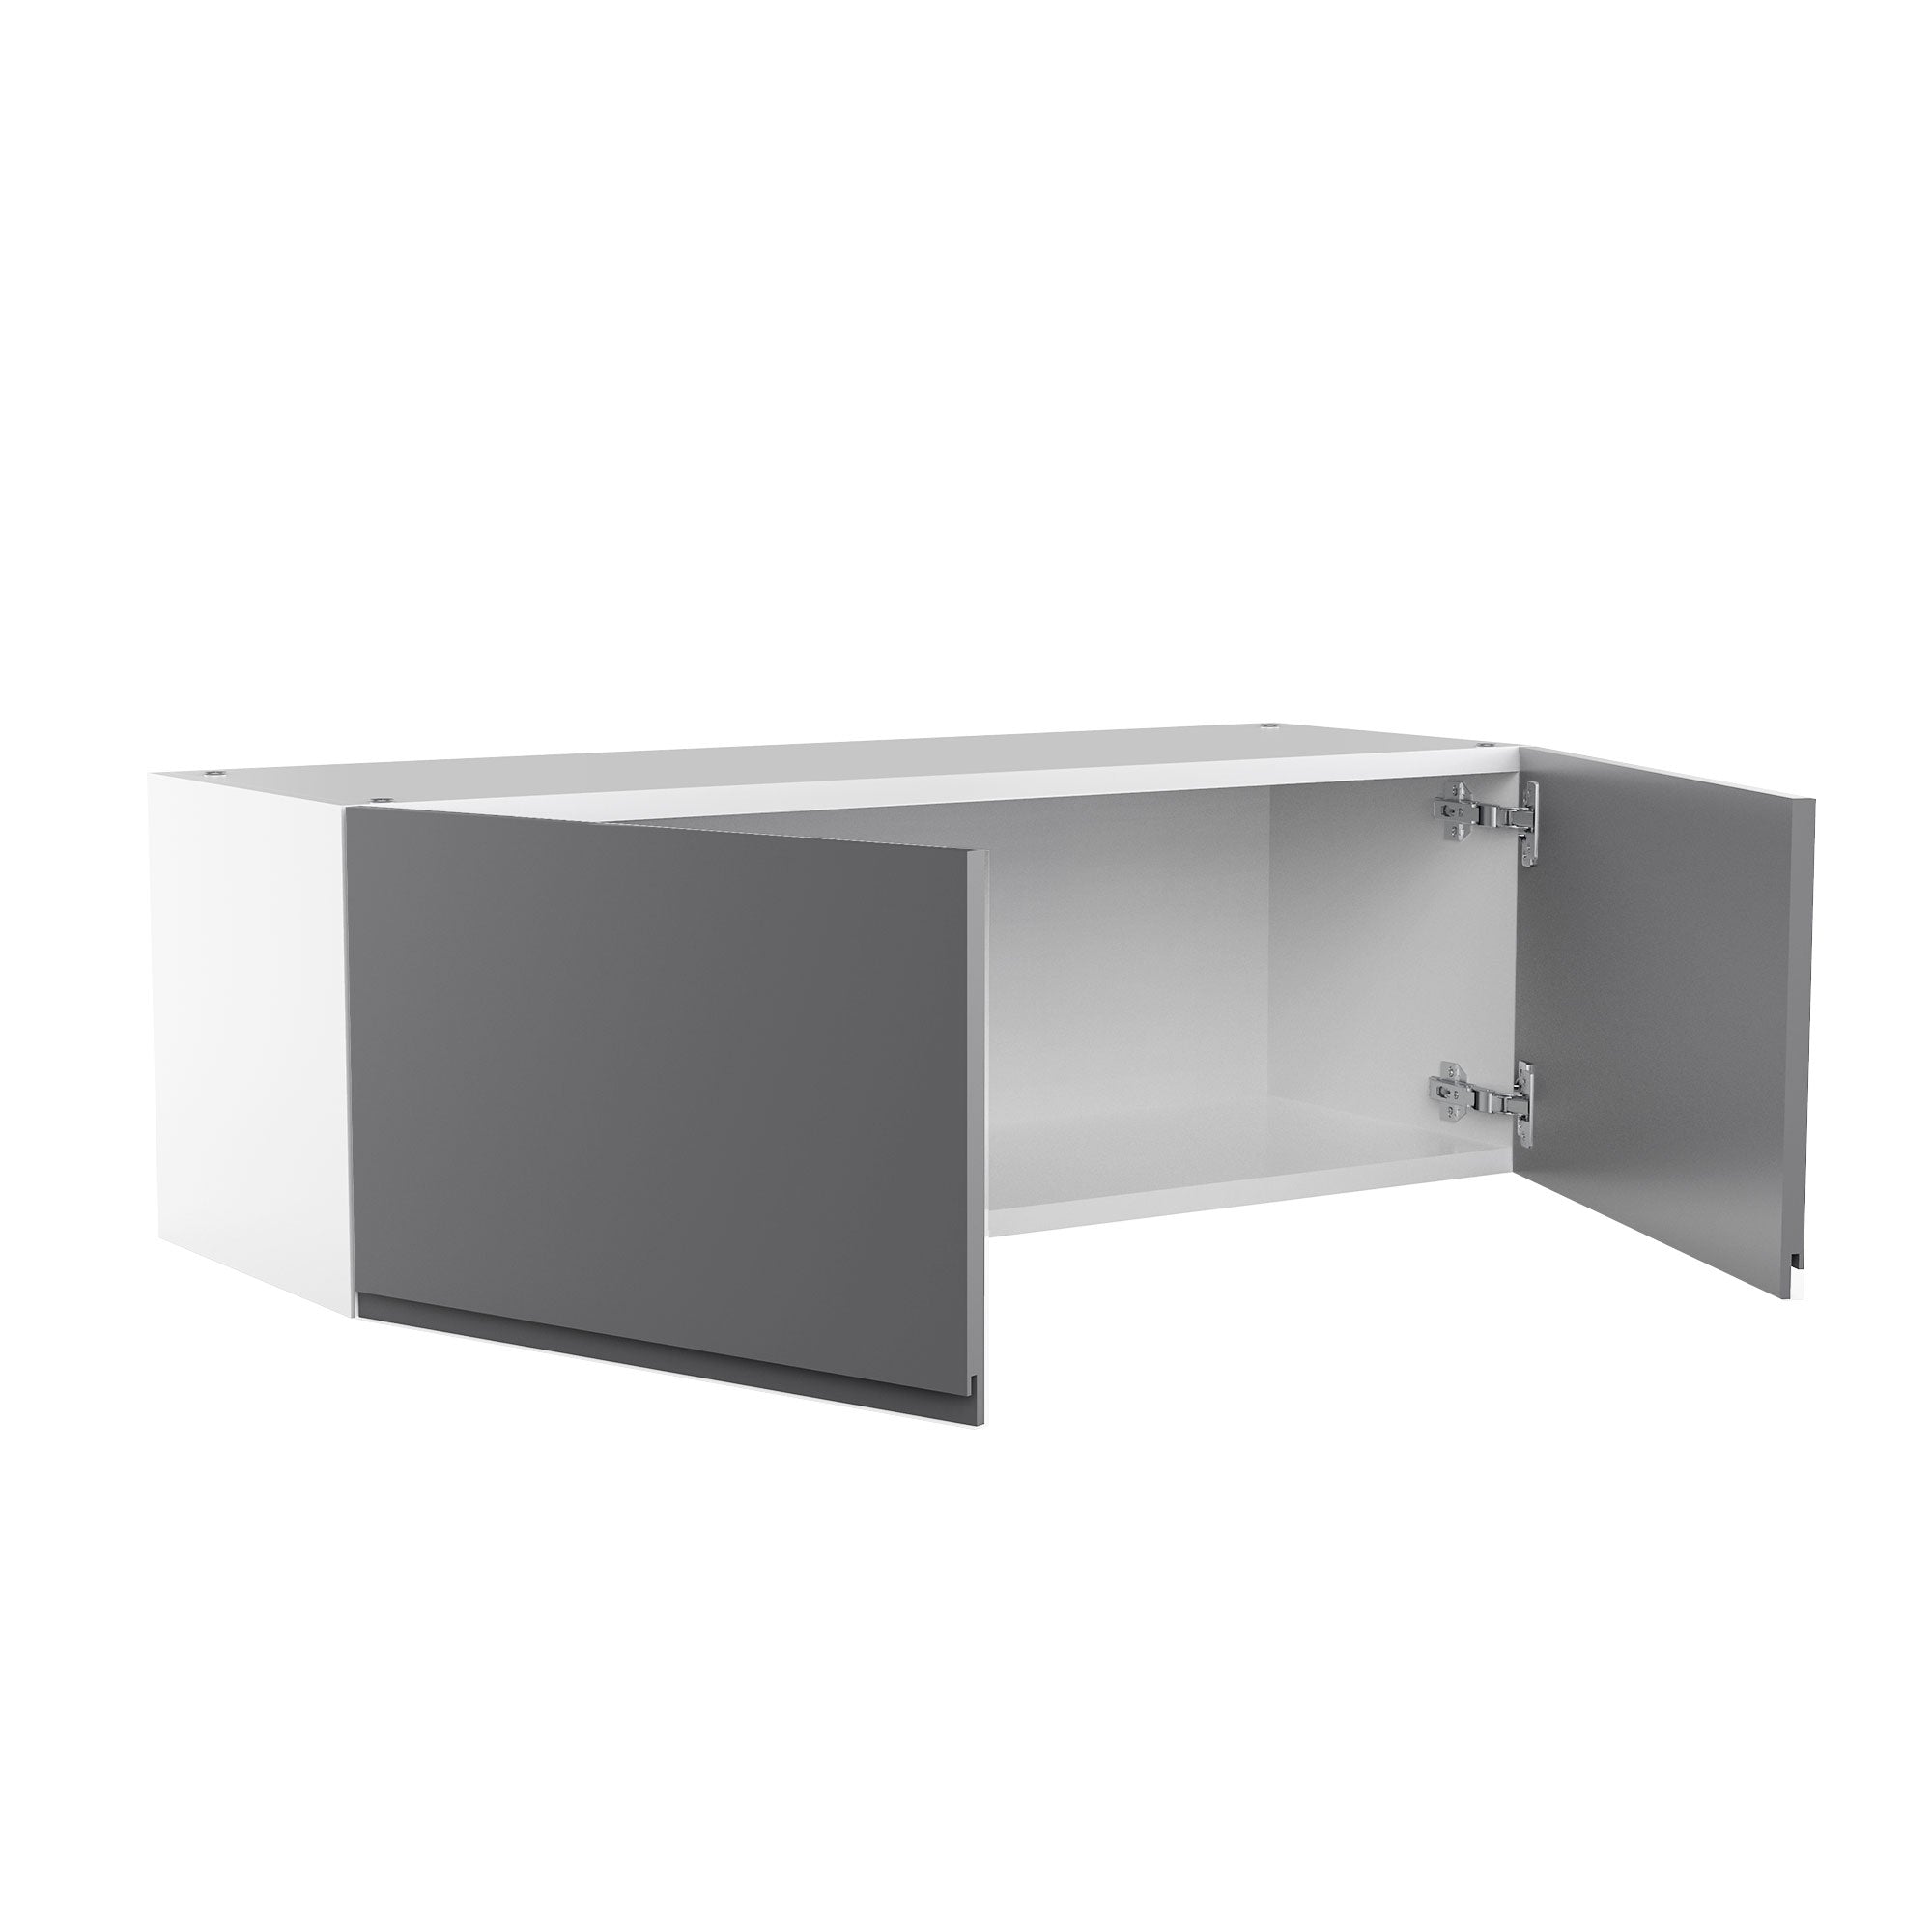 RTA - Lacquer Grey - Double Door Wall Cabinets | 36"W x 12"H x 12"D